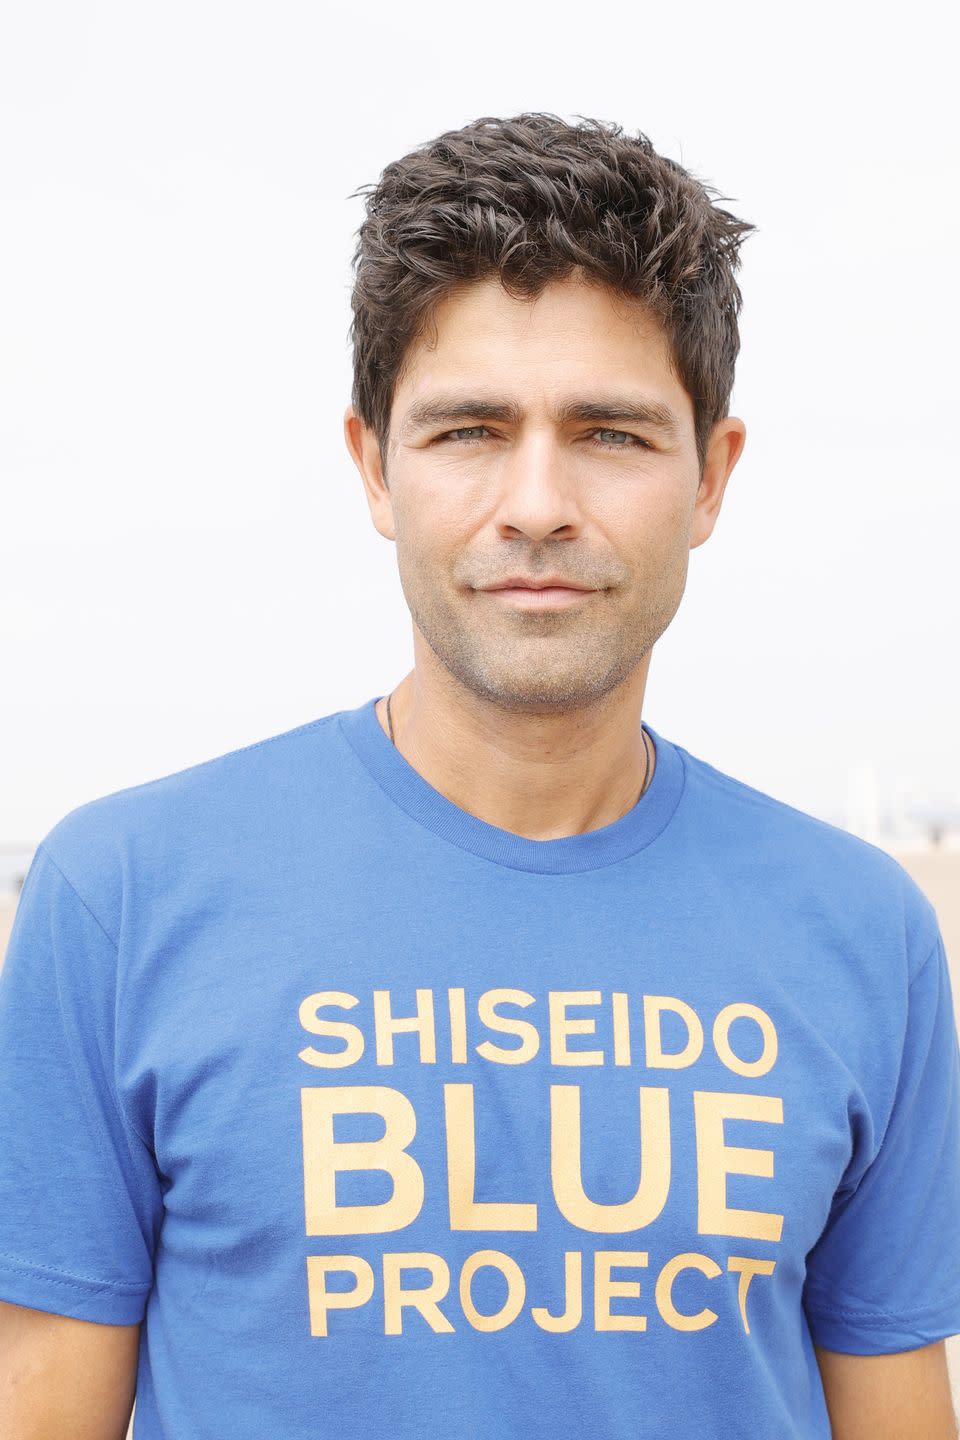 actorenvironmentalist adrian grenier hosts beach cleanup with world surf league pure and wildcoast hosted by shiseido blue project